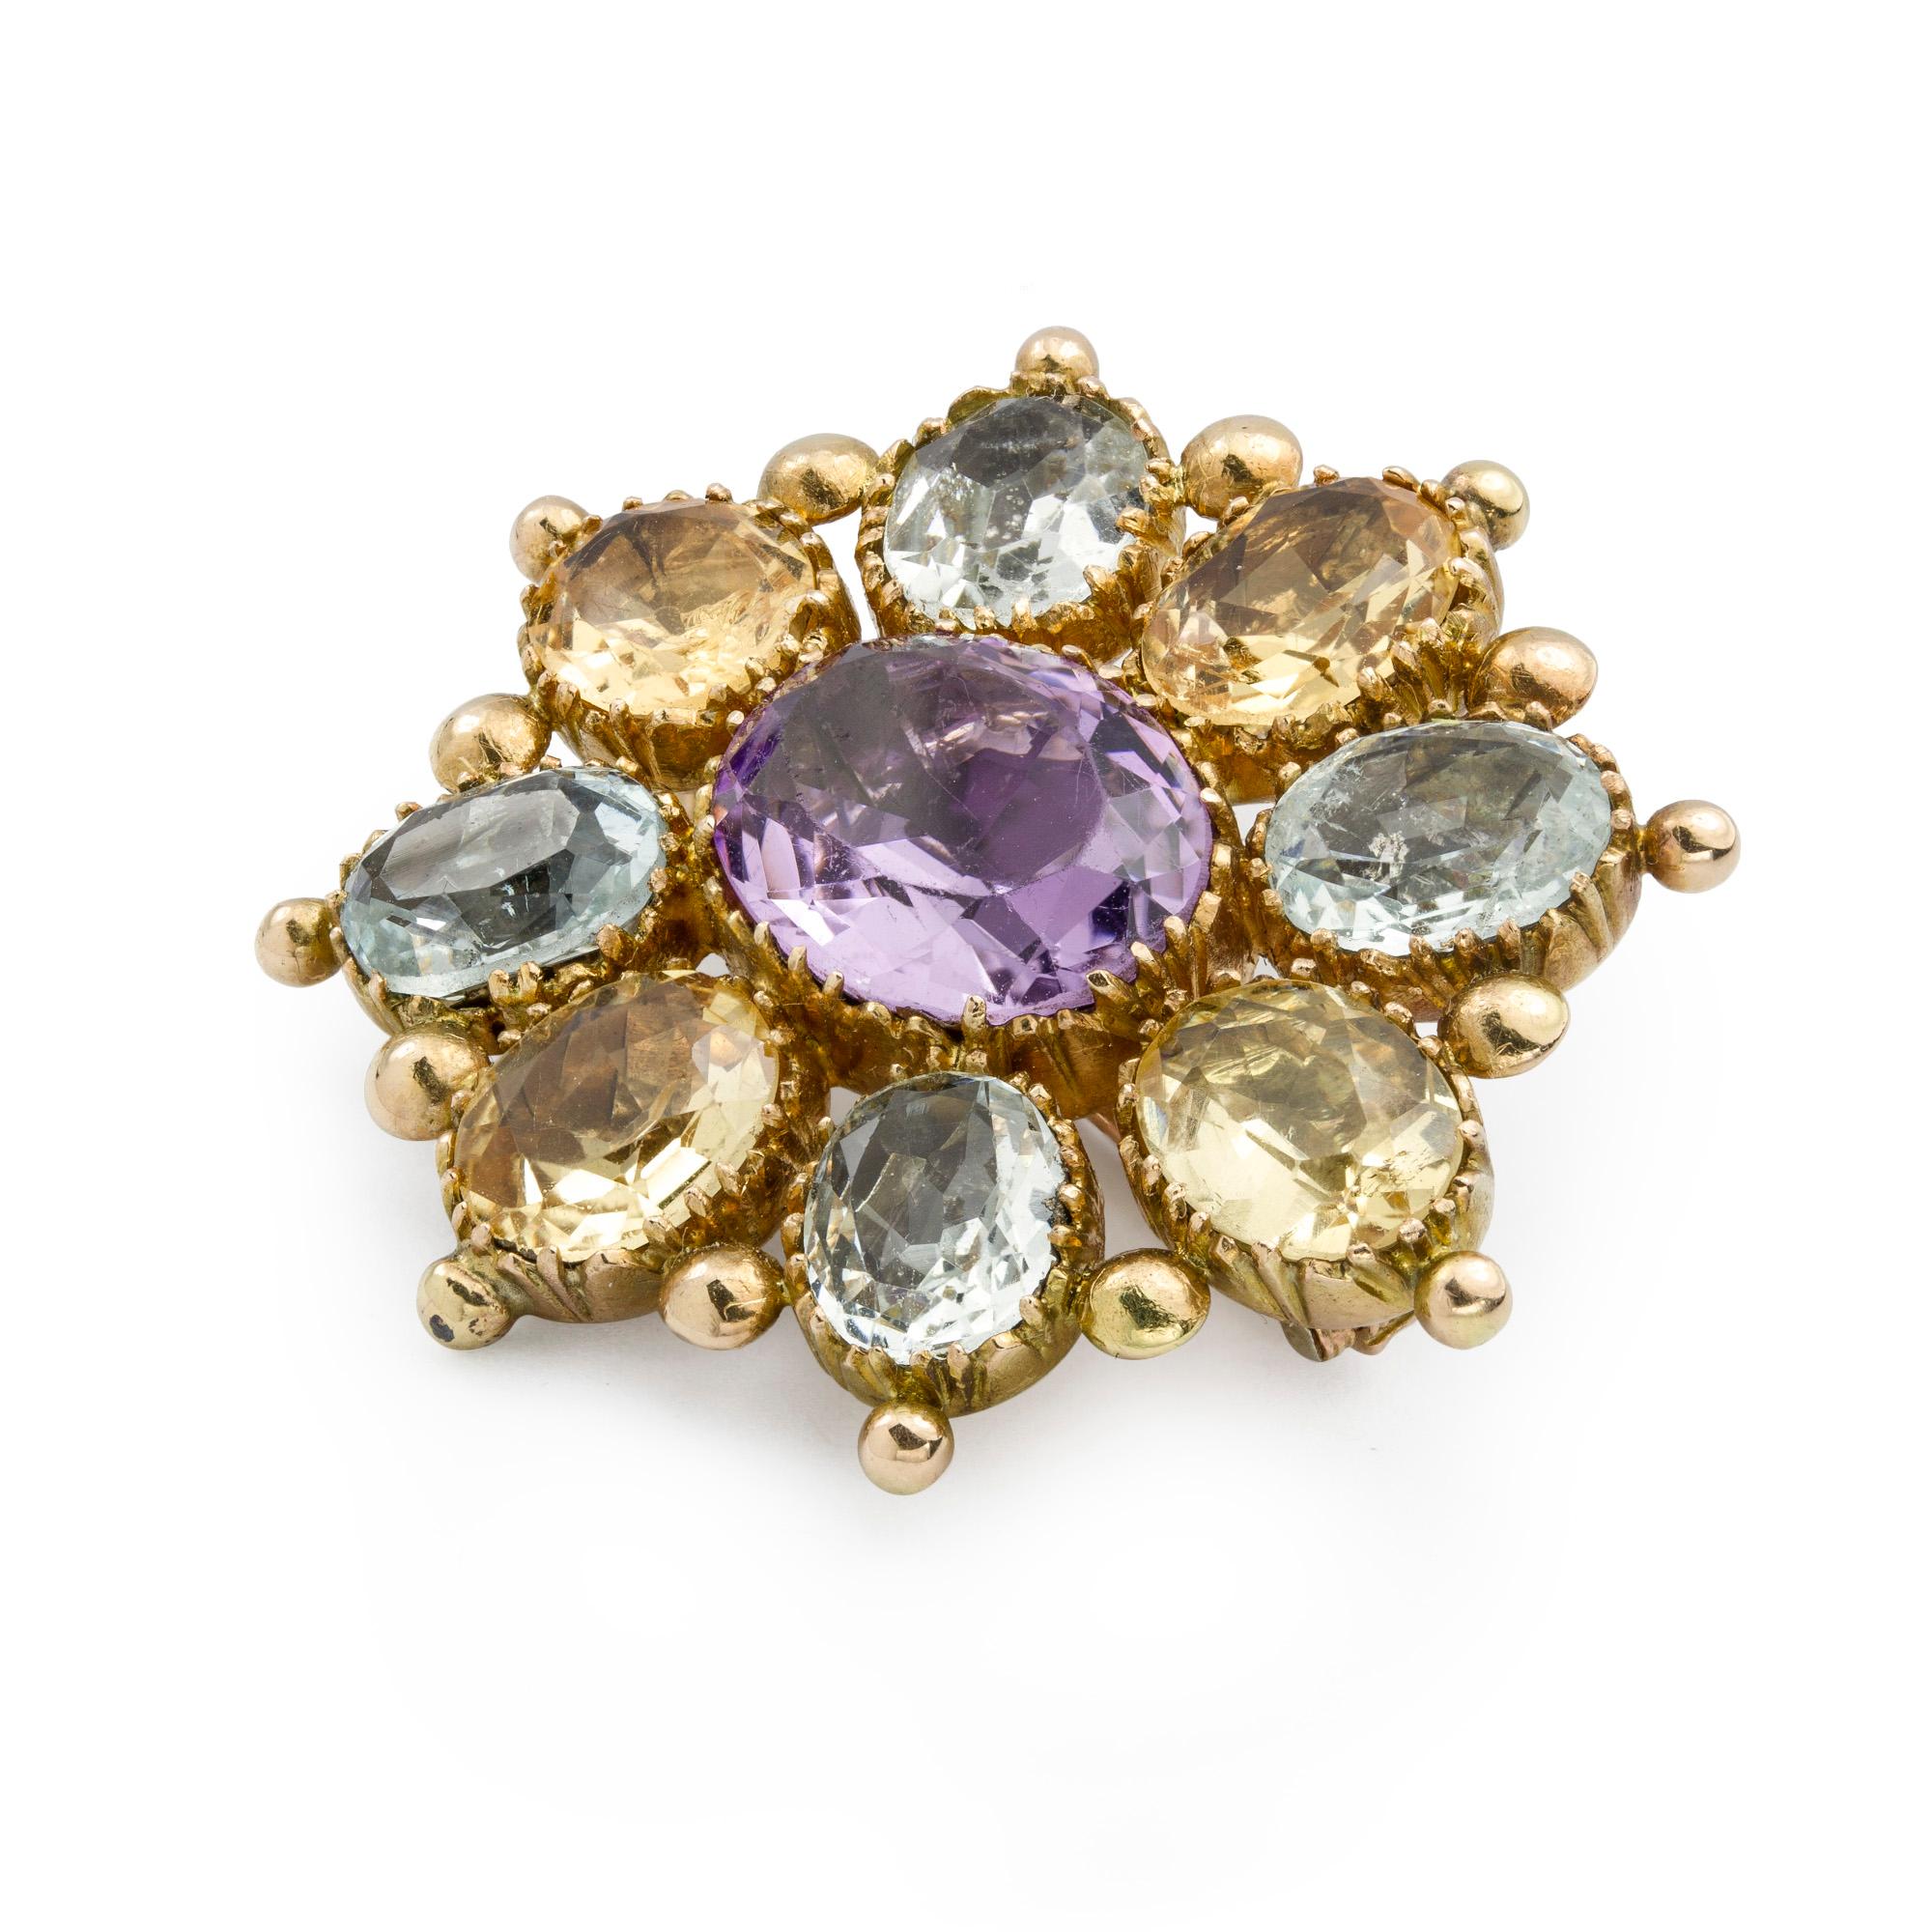 A Georgian multi-colour gem-set brooch, set with an oval amethyst to the centre to a border of citrine and aquamarine with gold ball detail set between each, measuring approximately 3.6cm x 3.2cm, all in 18ct yellow gold, circa 1830, gross weight